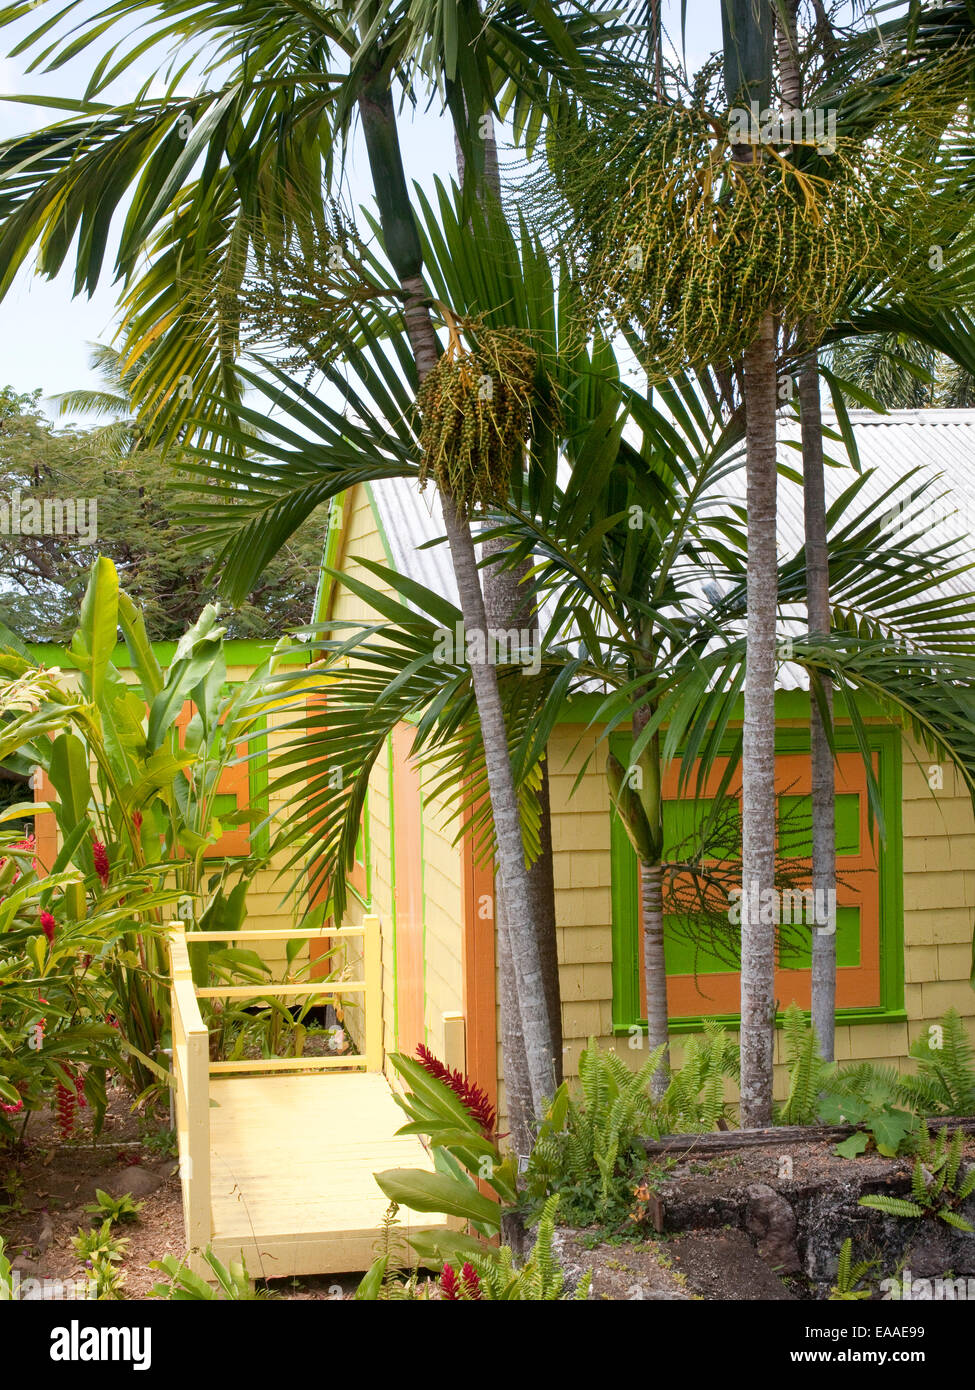 brightly colored small wooden house and palm trees on tropical island. Stock Photo